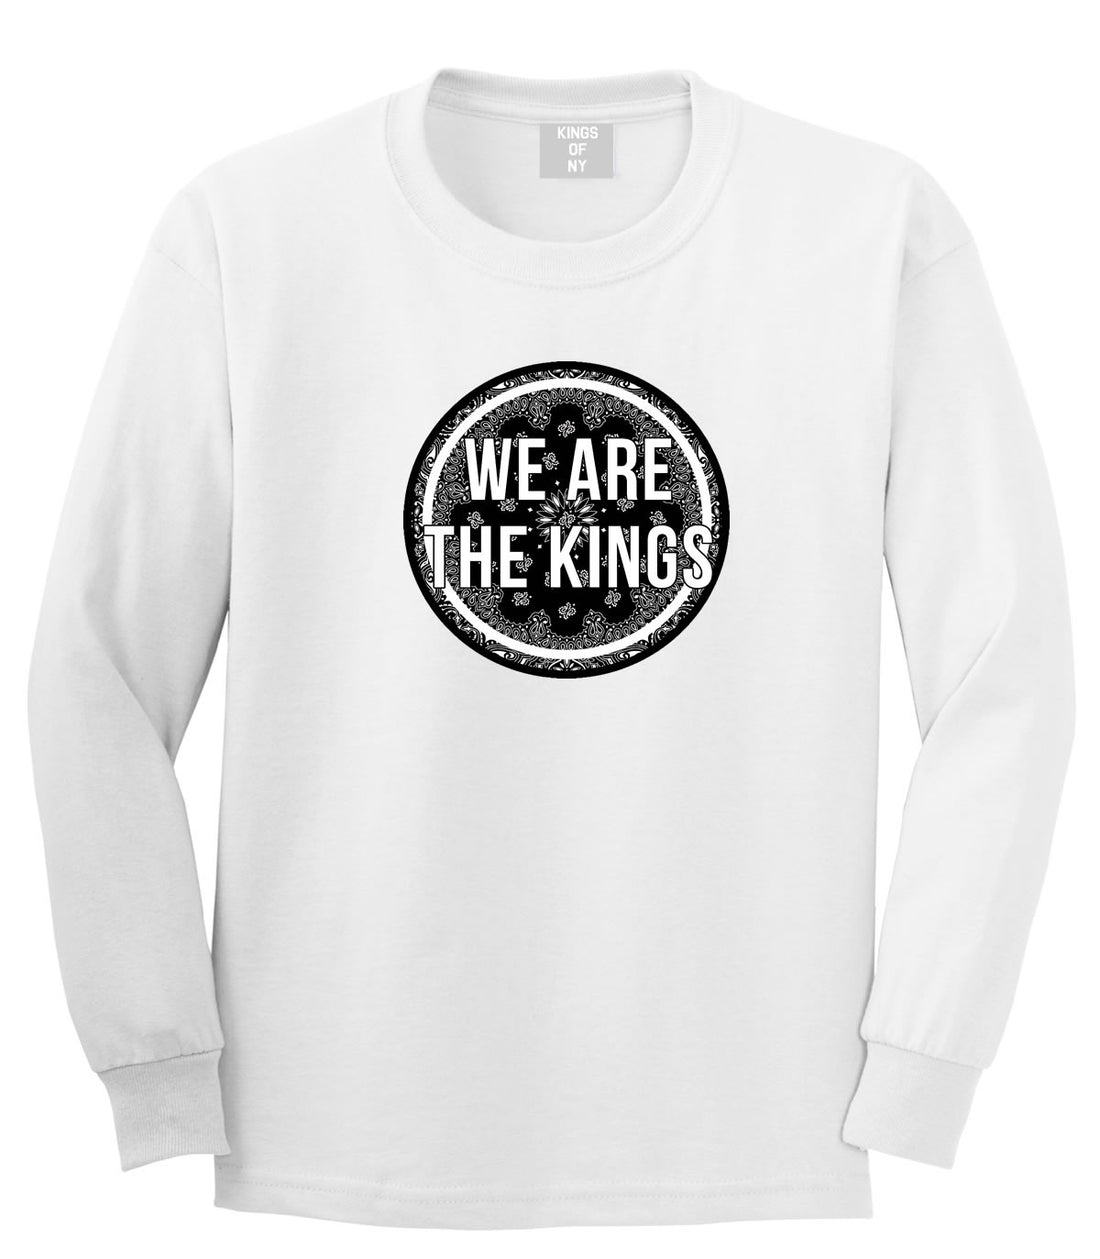 Kings Of NY We Are The Kings Long Sleeve T-Shirt in White